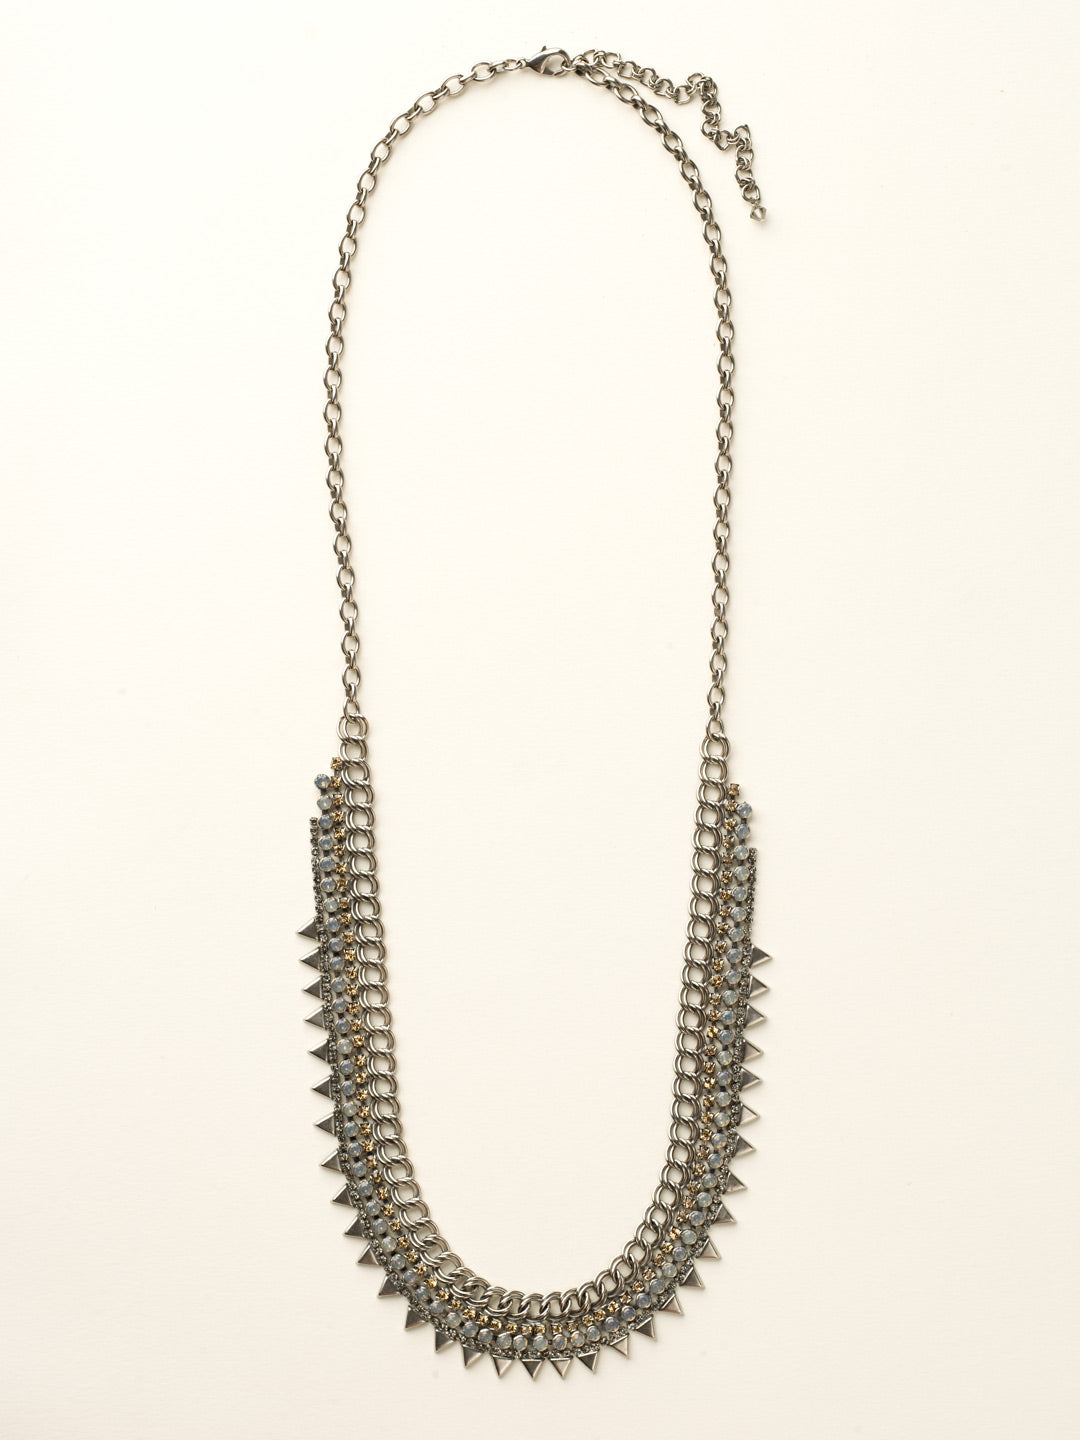 Crystal and Metal Spike Long Strand Necklace - NCW8ASGNS - <p>Featuring three layers of crystal accented with metal spikes, this long strand necklace is the embodiment of rocker glam. From Sorrelli's Golden Shadow collection in our Antique Silver-tone finish.</p>